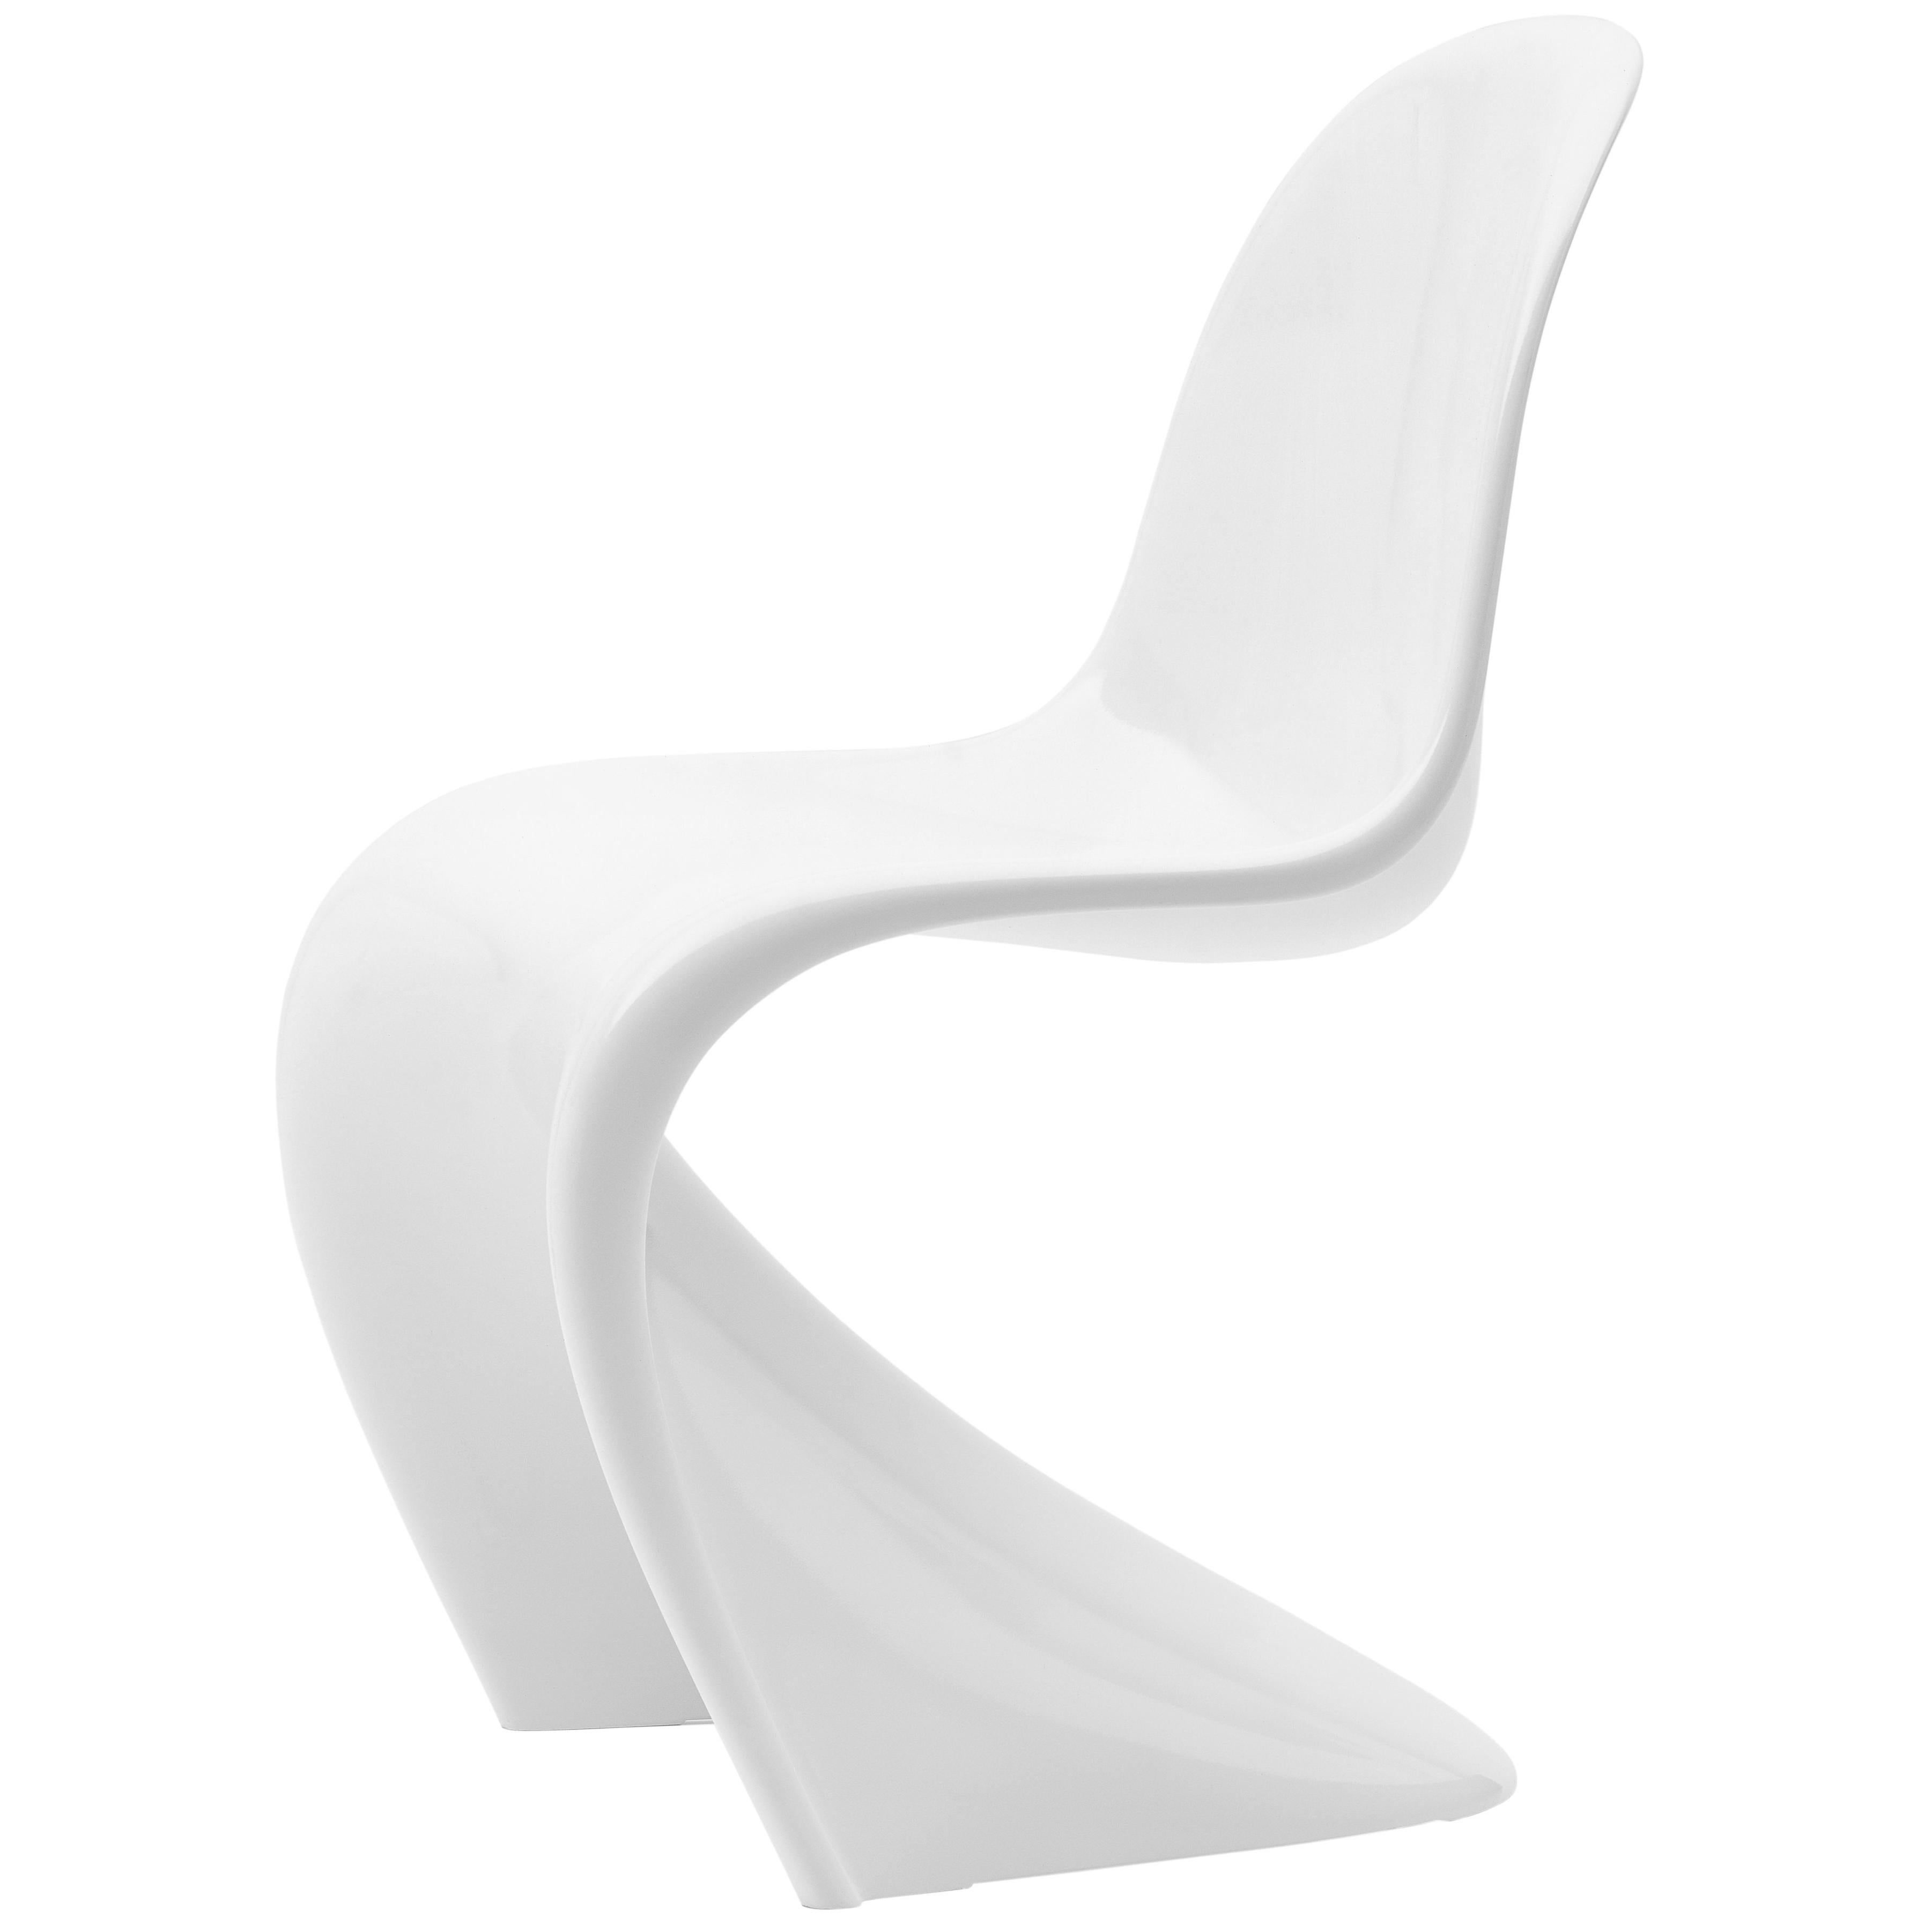 Vitra Classic Panton Chair in Lacquered White by Verner Panton For Sale